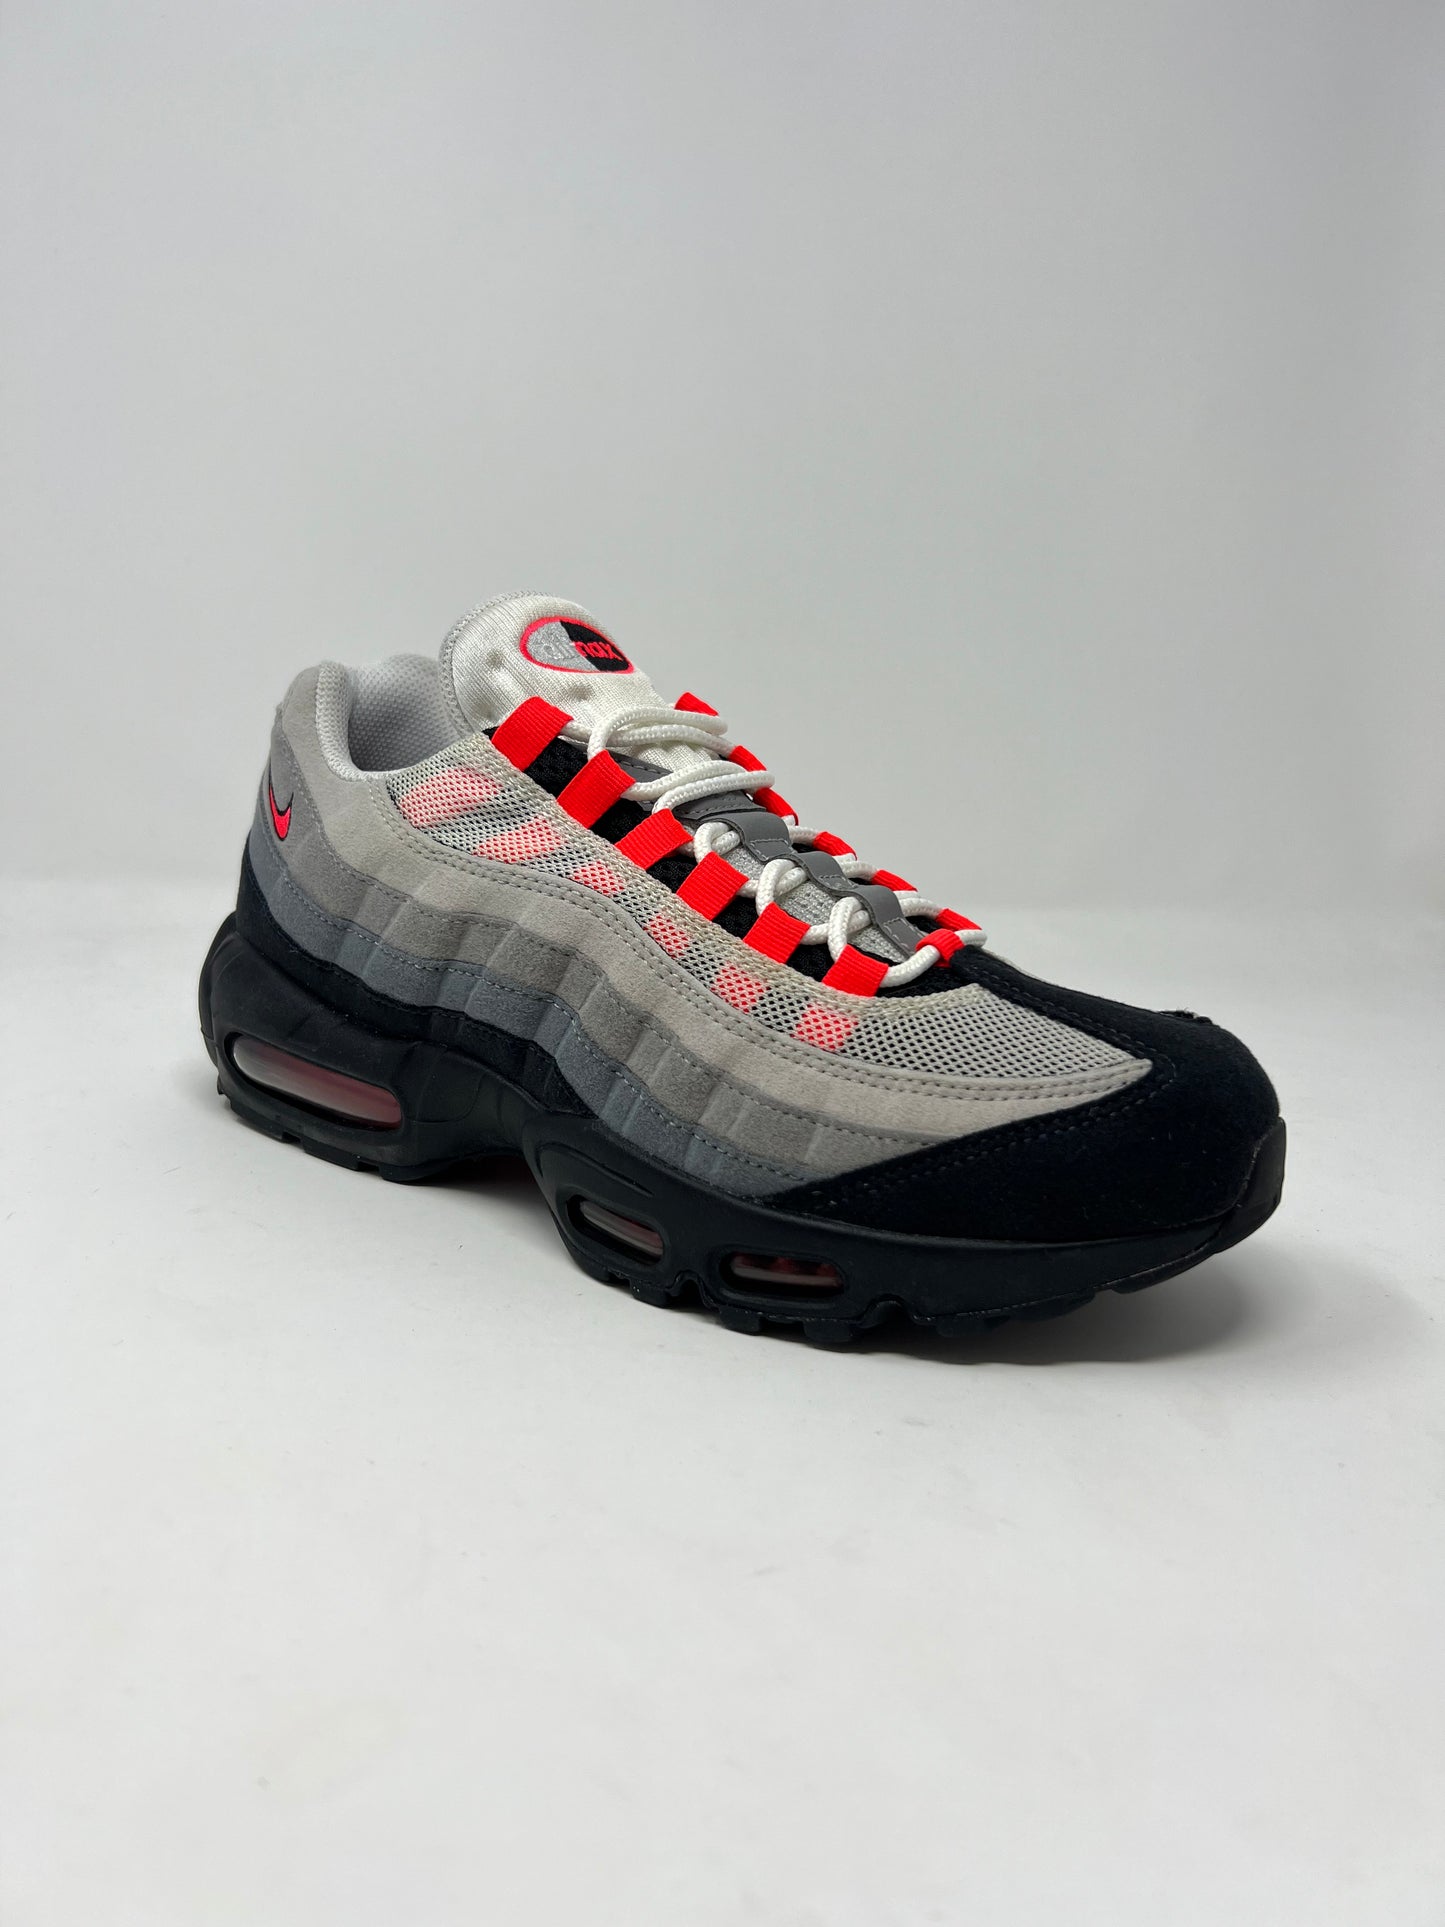 Nike Air Max 95 2017 Solar Red US Exclusive UK8